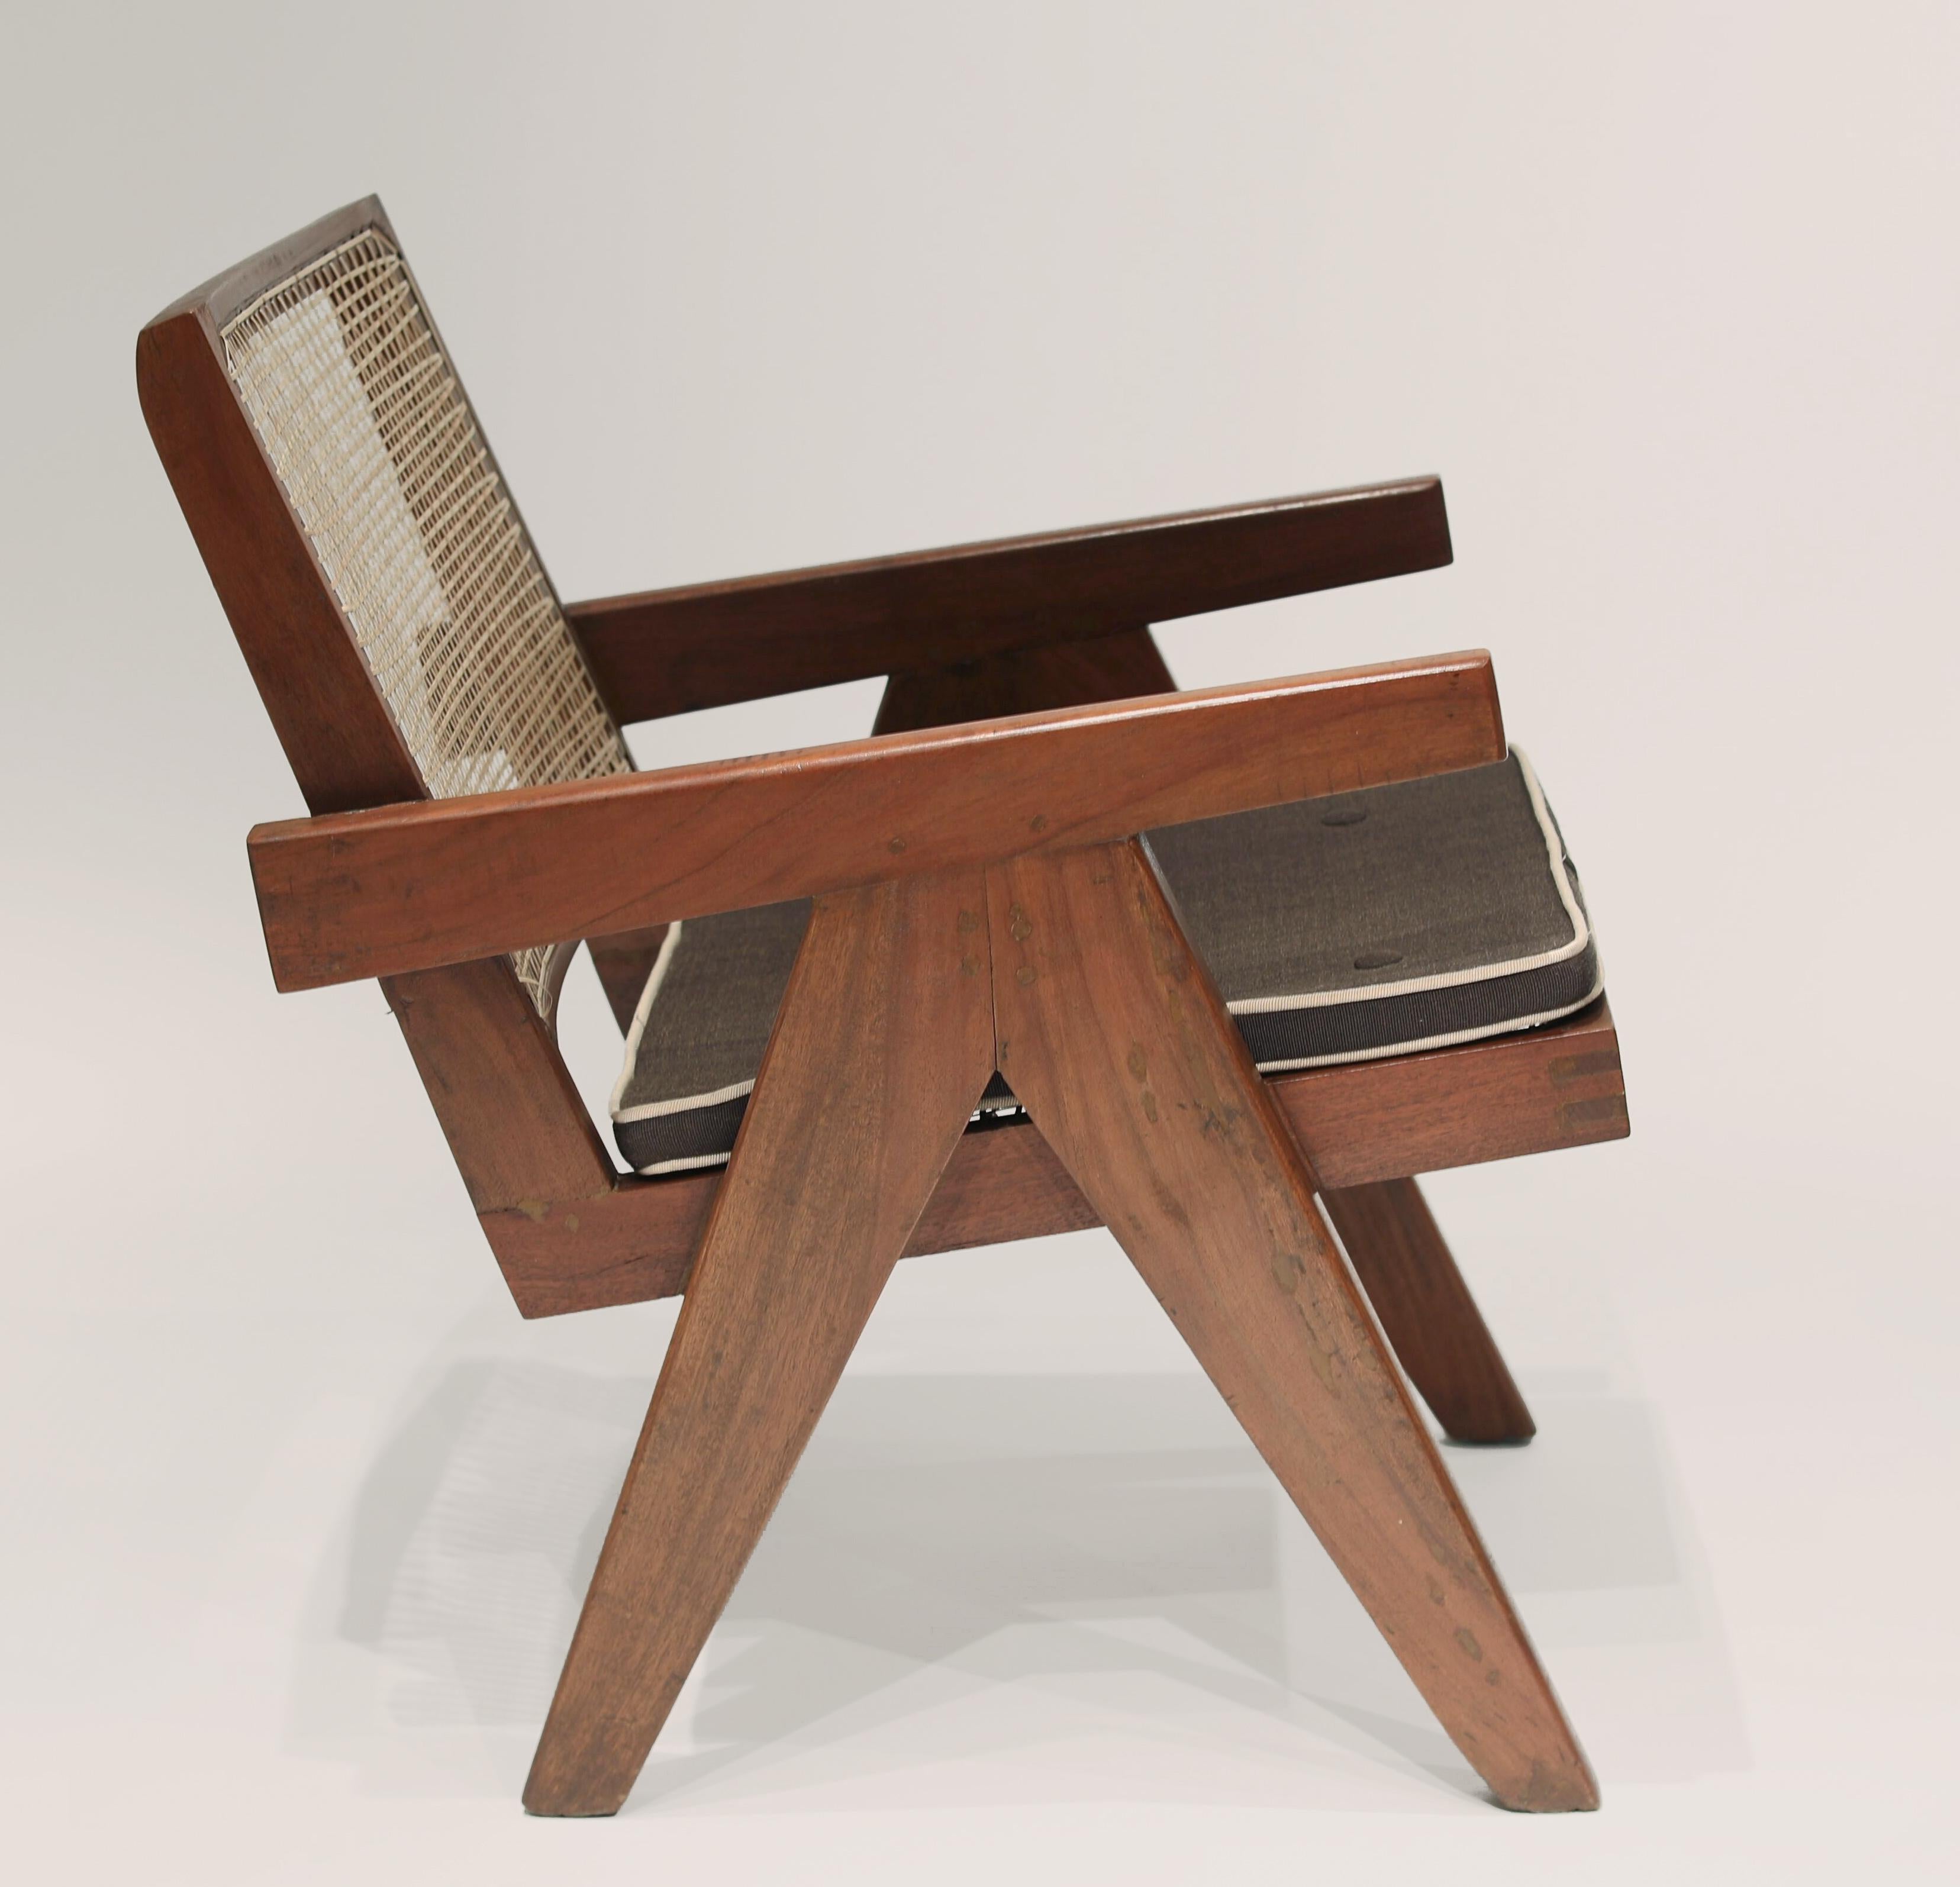 Pair of Pierre Jeanneret 'Easy Chairs' (Model PJ-SI-29-A) from administrative buildings, Chandigarh India circa 1955. (Literature: Touchaleeaume and Moreau, Le Corbusier Pierre Jeanneret: The Indian Adventure, Design - Art - Architecture.).
 